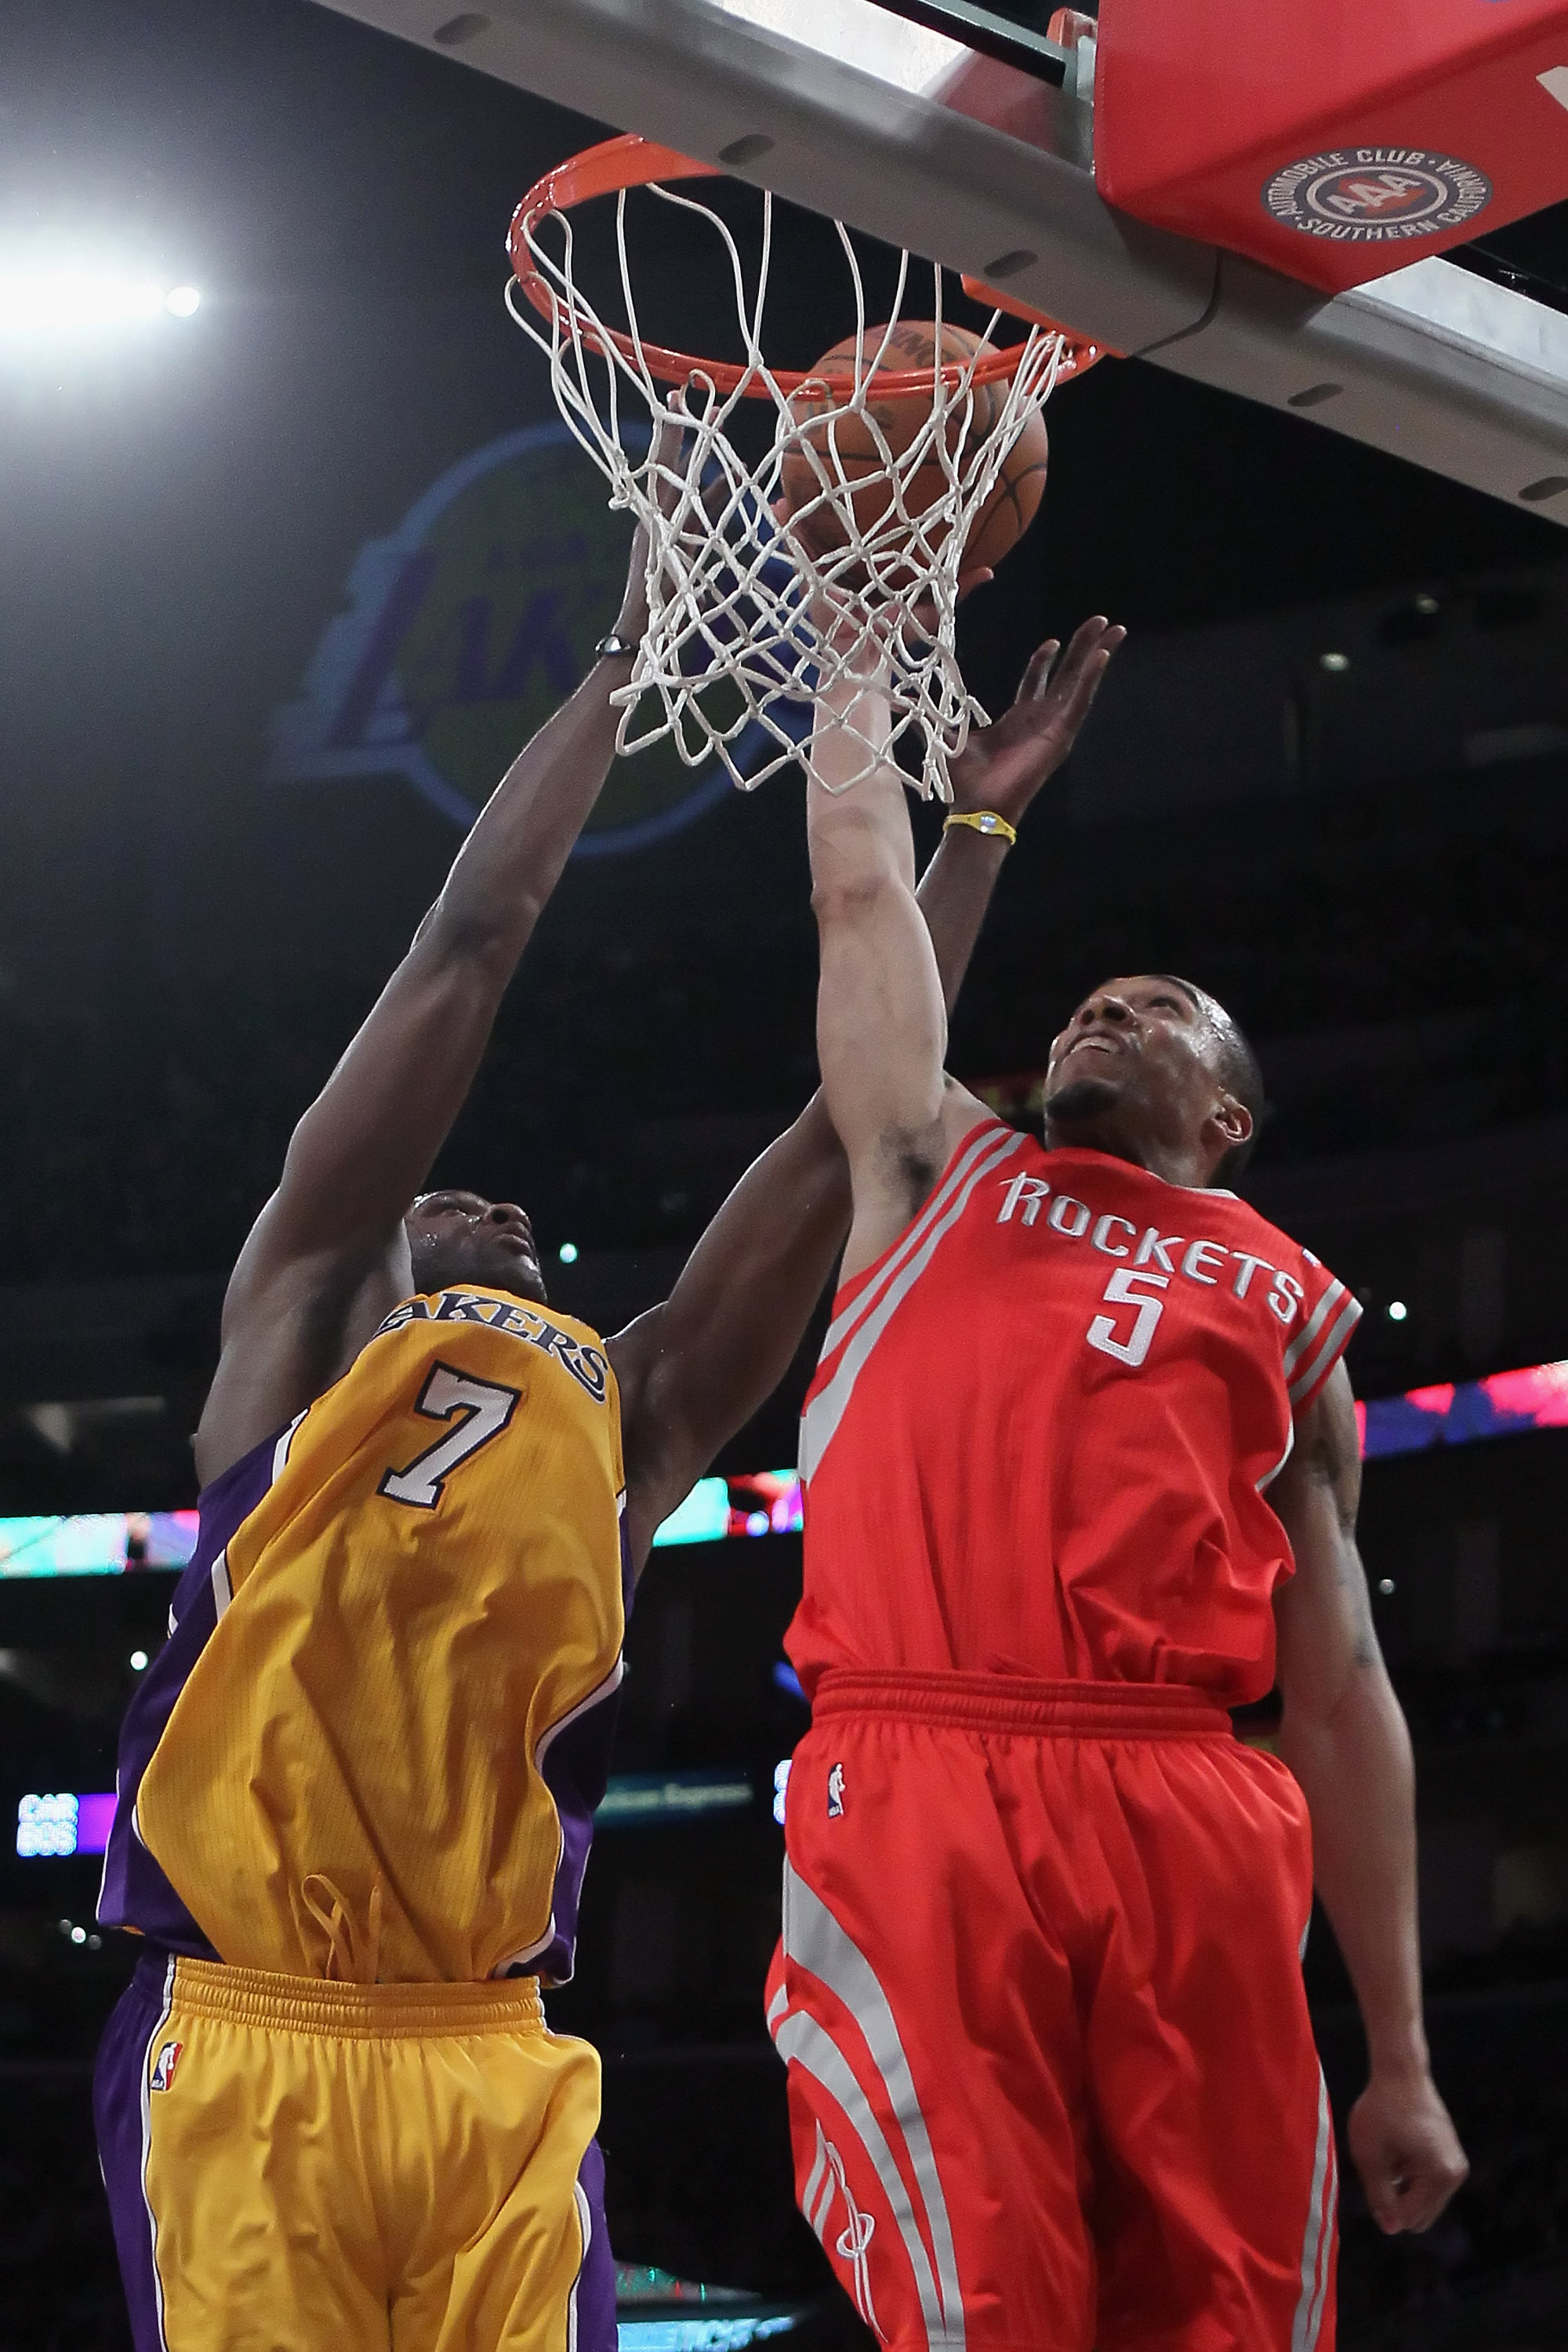 LOS ANGELES, CA - FEBRUARY 01:  Lamar Odom #7 of the Los Angeles Lakers and Courtney Lee #5 of the Houston Rockets battle for a rebound in the second half at Staples Center on February 1, 2011 in Los Angeles, California. The Lakers defeated the Rockets 11